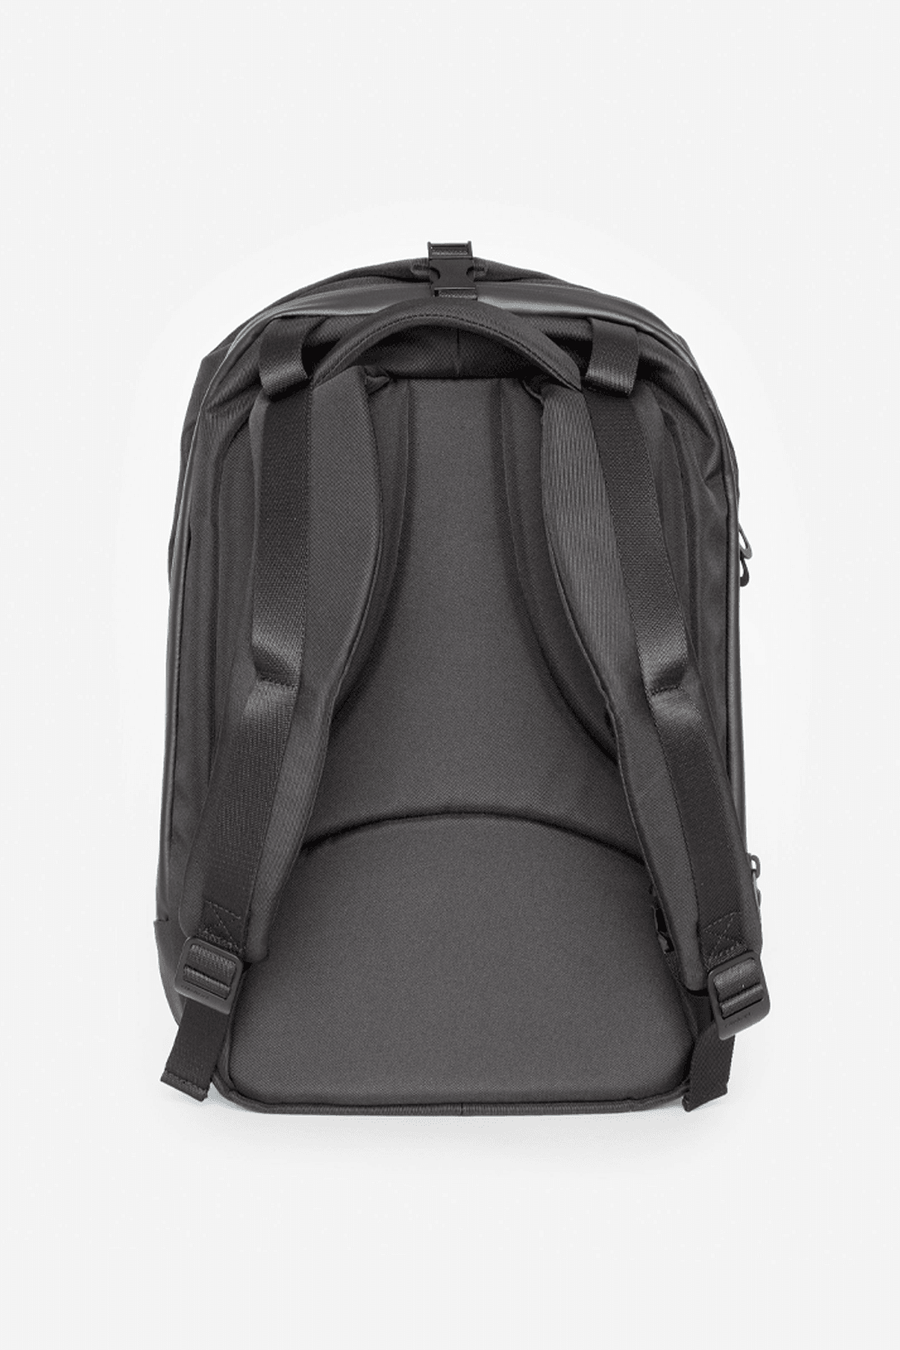 Buy the Cote & Ciel Oril Smal EcoYarn Backpack in Black at Intro. Spend £50 for free UK delivery. Official stockists. We ship worldwide.